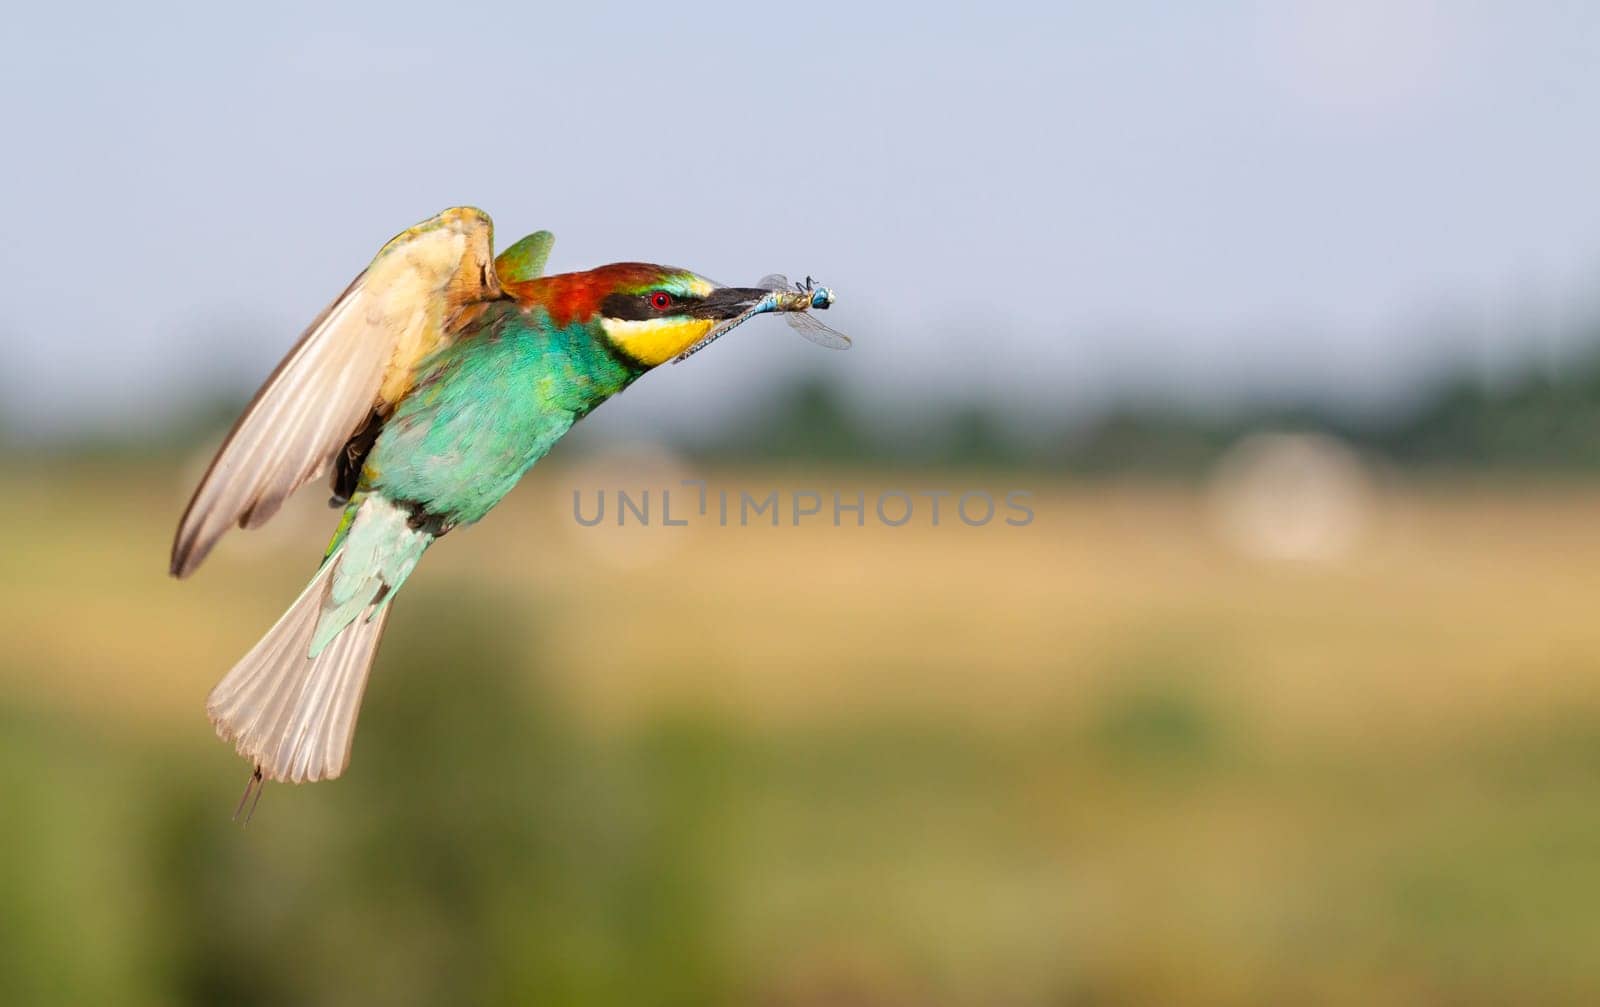 bee-eater flies with a dragonfly in its beak by drakuliren